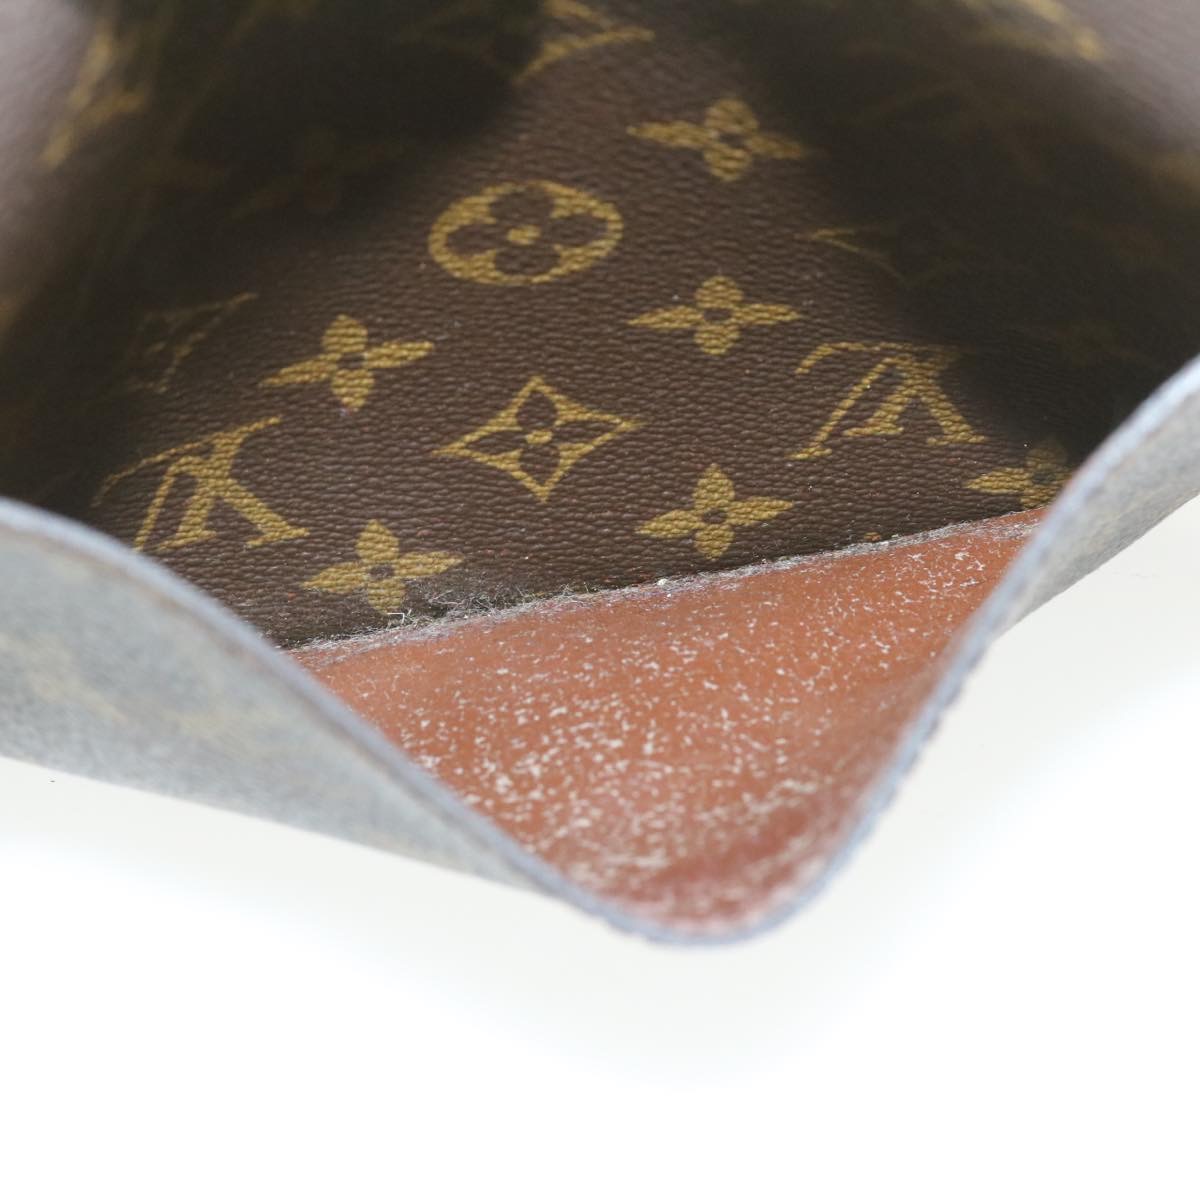 What happens to unsold Chanel or Louis Vuitton bags? - Quora